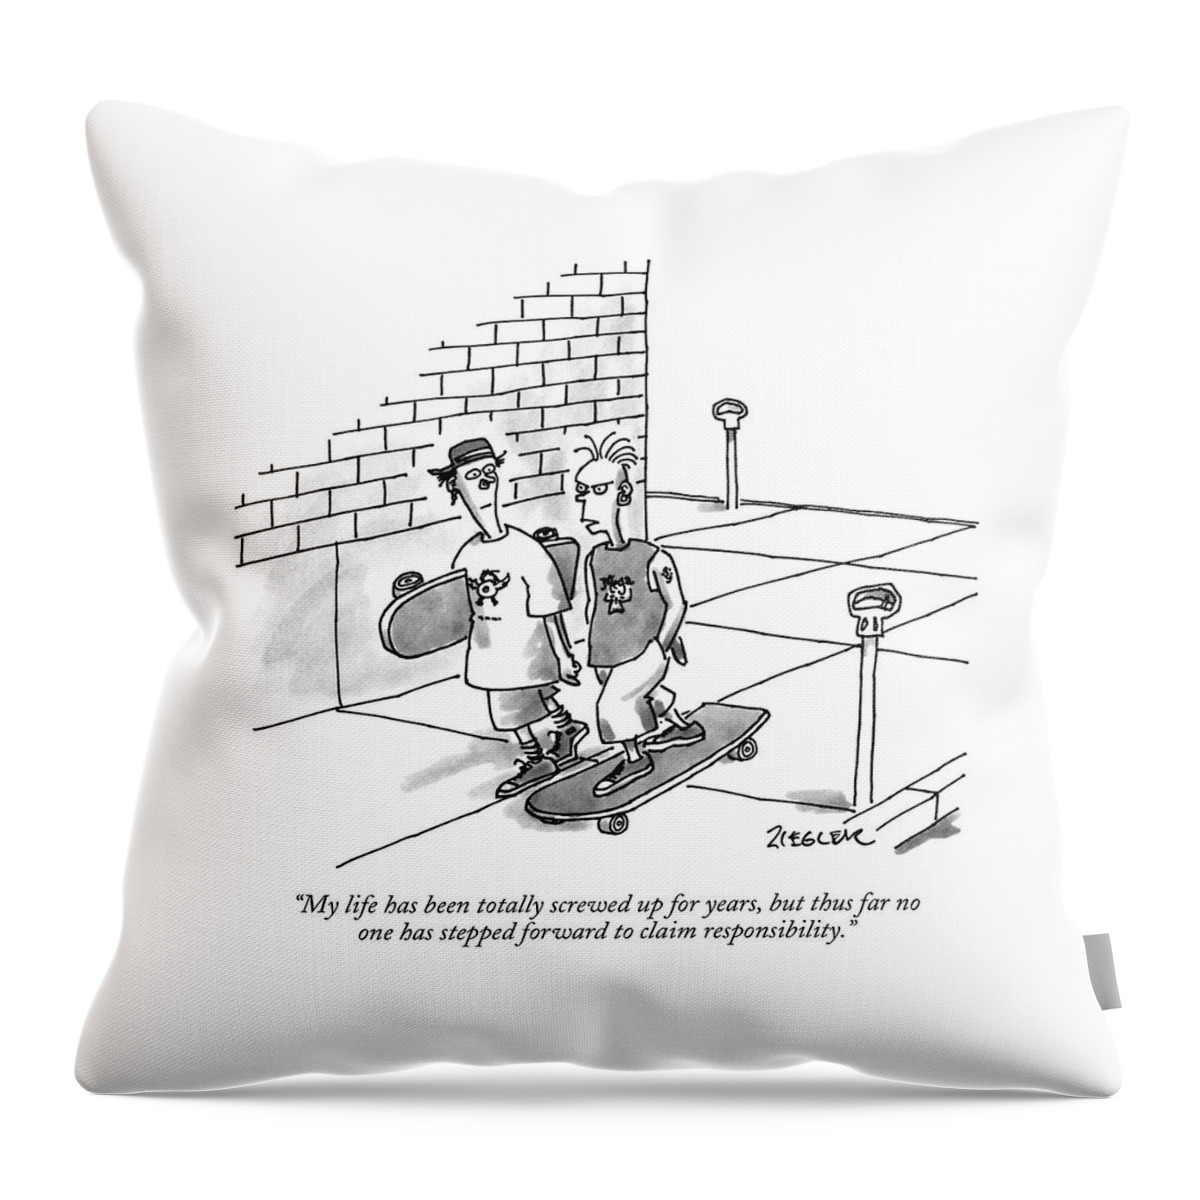 My Life Has Been Totally Screwed Up For Years Throw Pillow